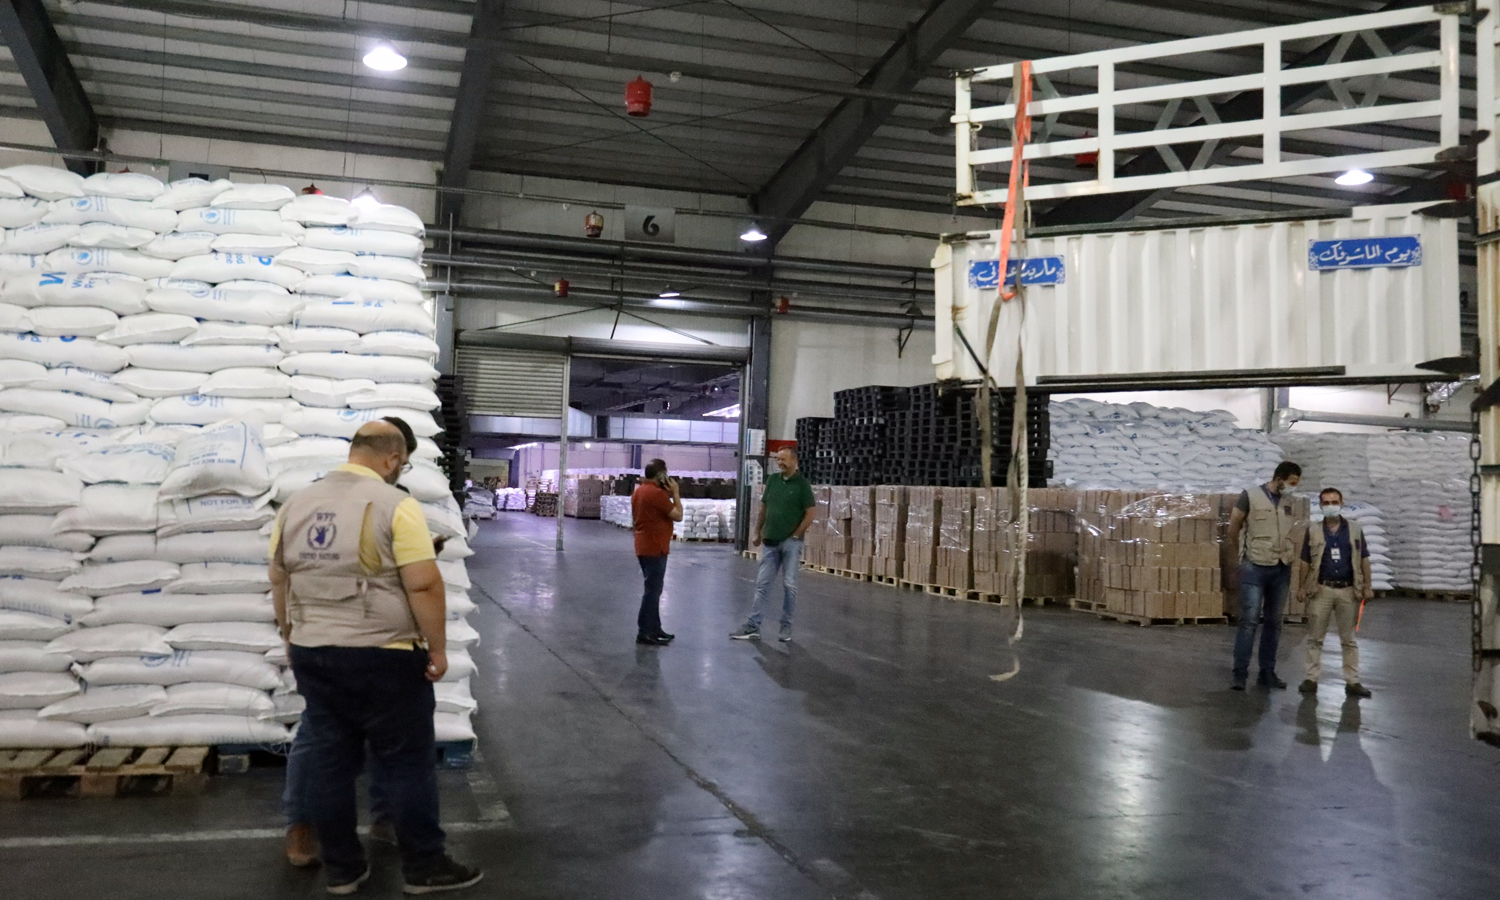 Workers at the World Food Programme (WFP) loading trucks with relief assistance to be delivered from regime areas to northwestern Syria - 30 August 2021 (Twitter)